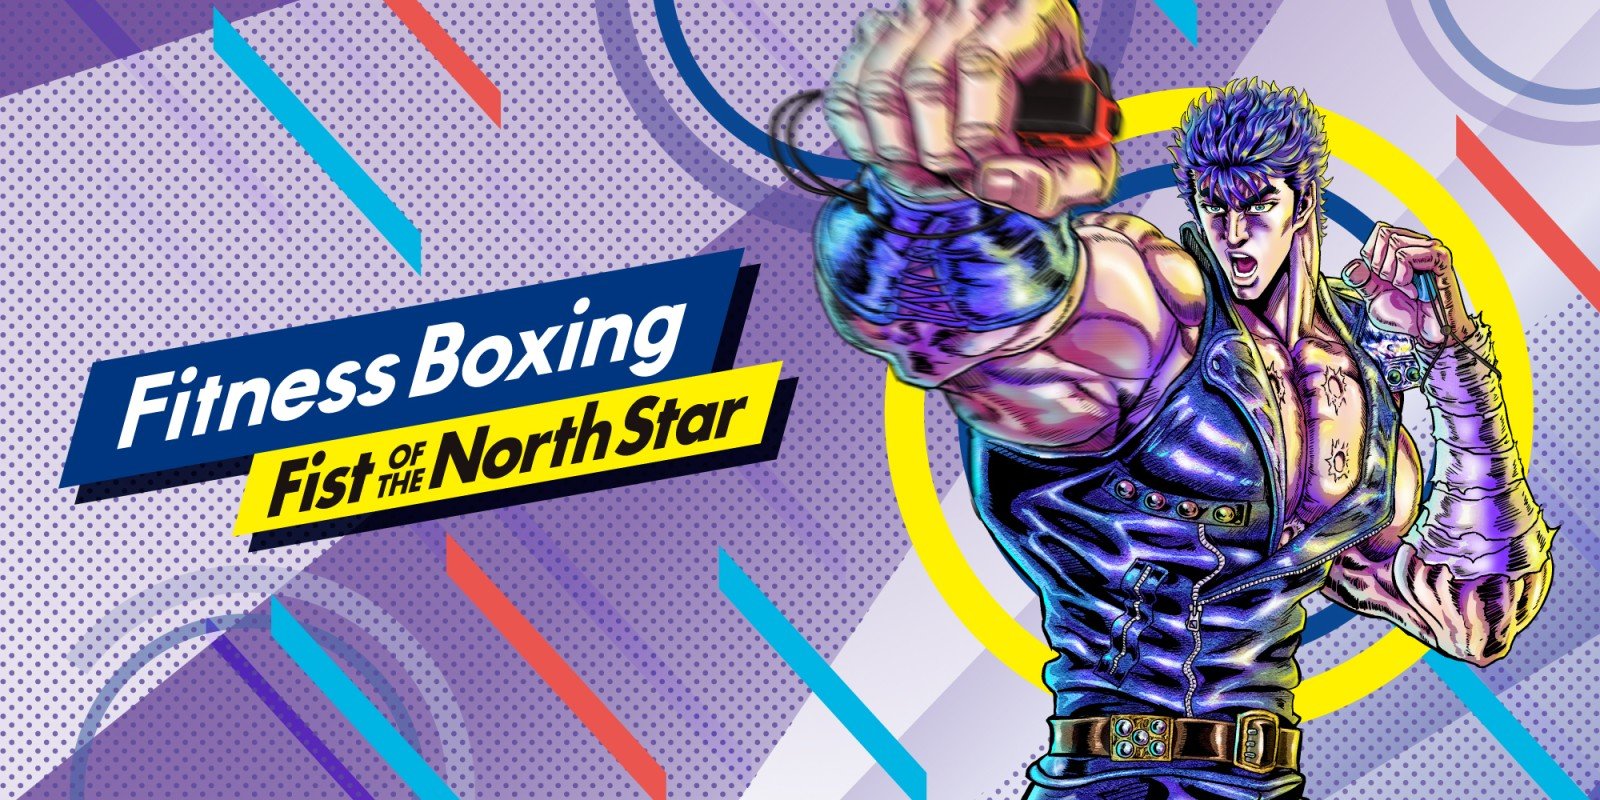 Fitness Boxing, Fist of the North Star